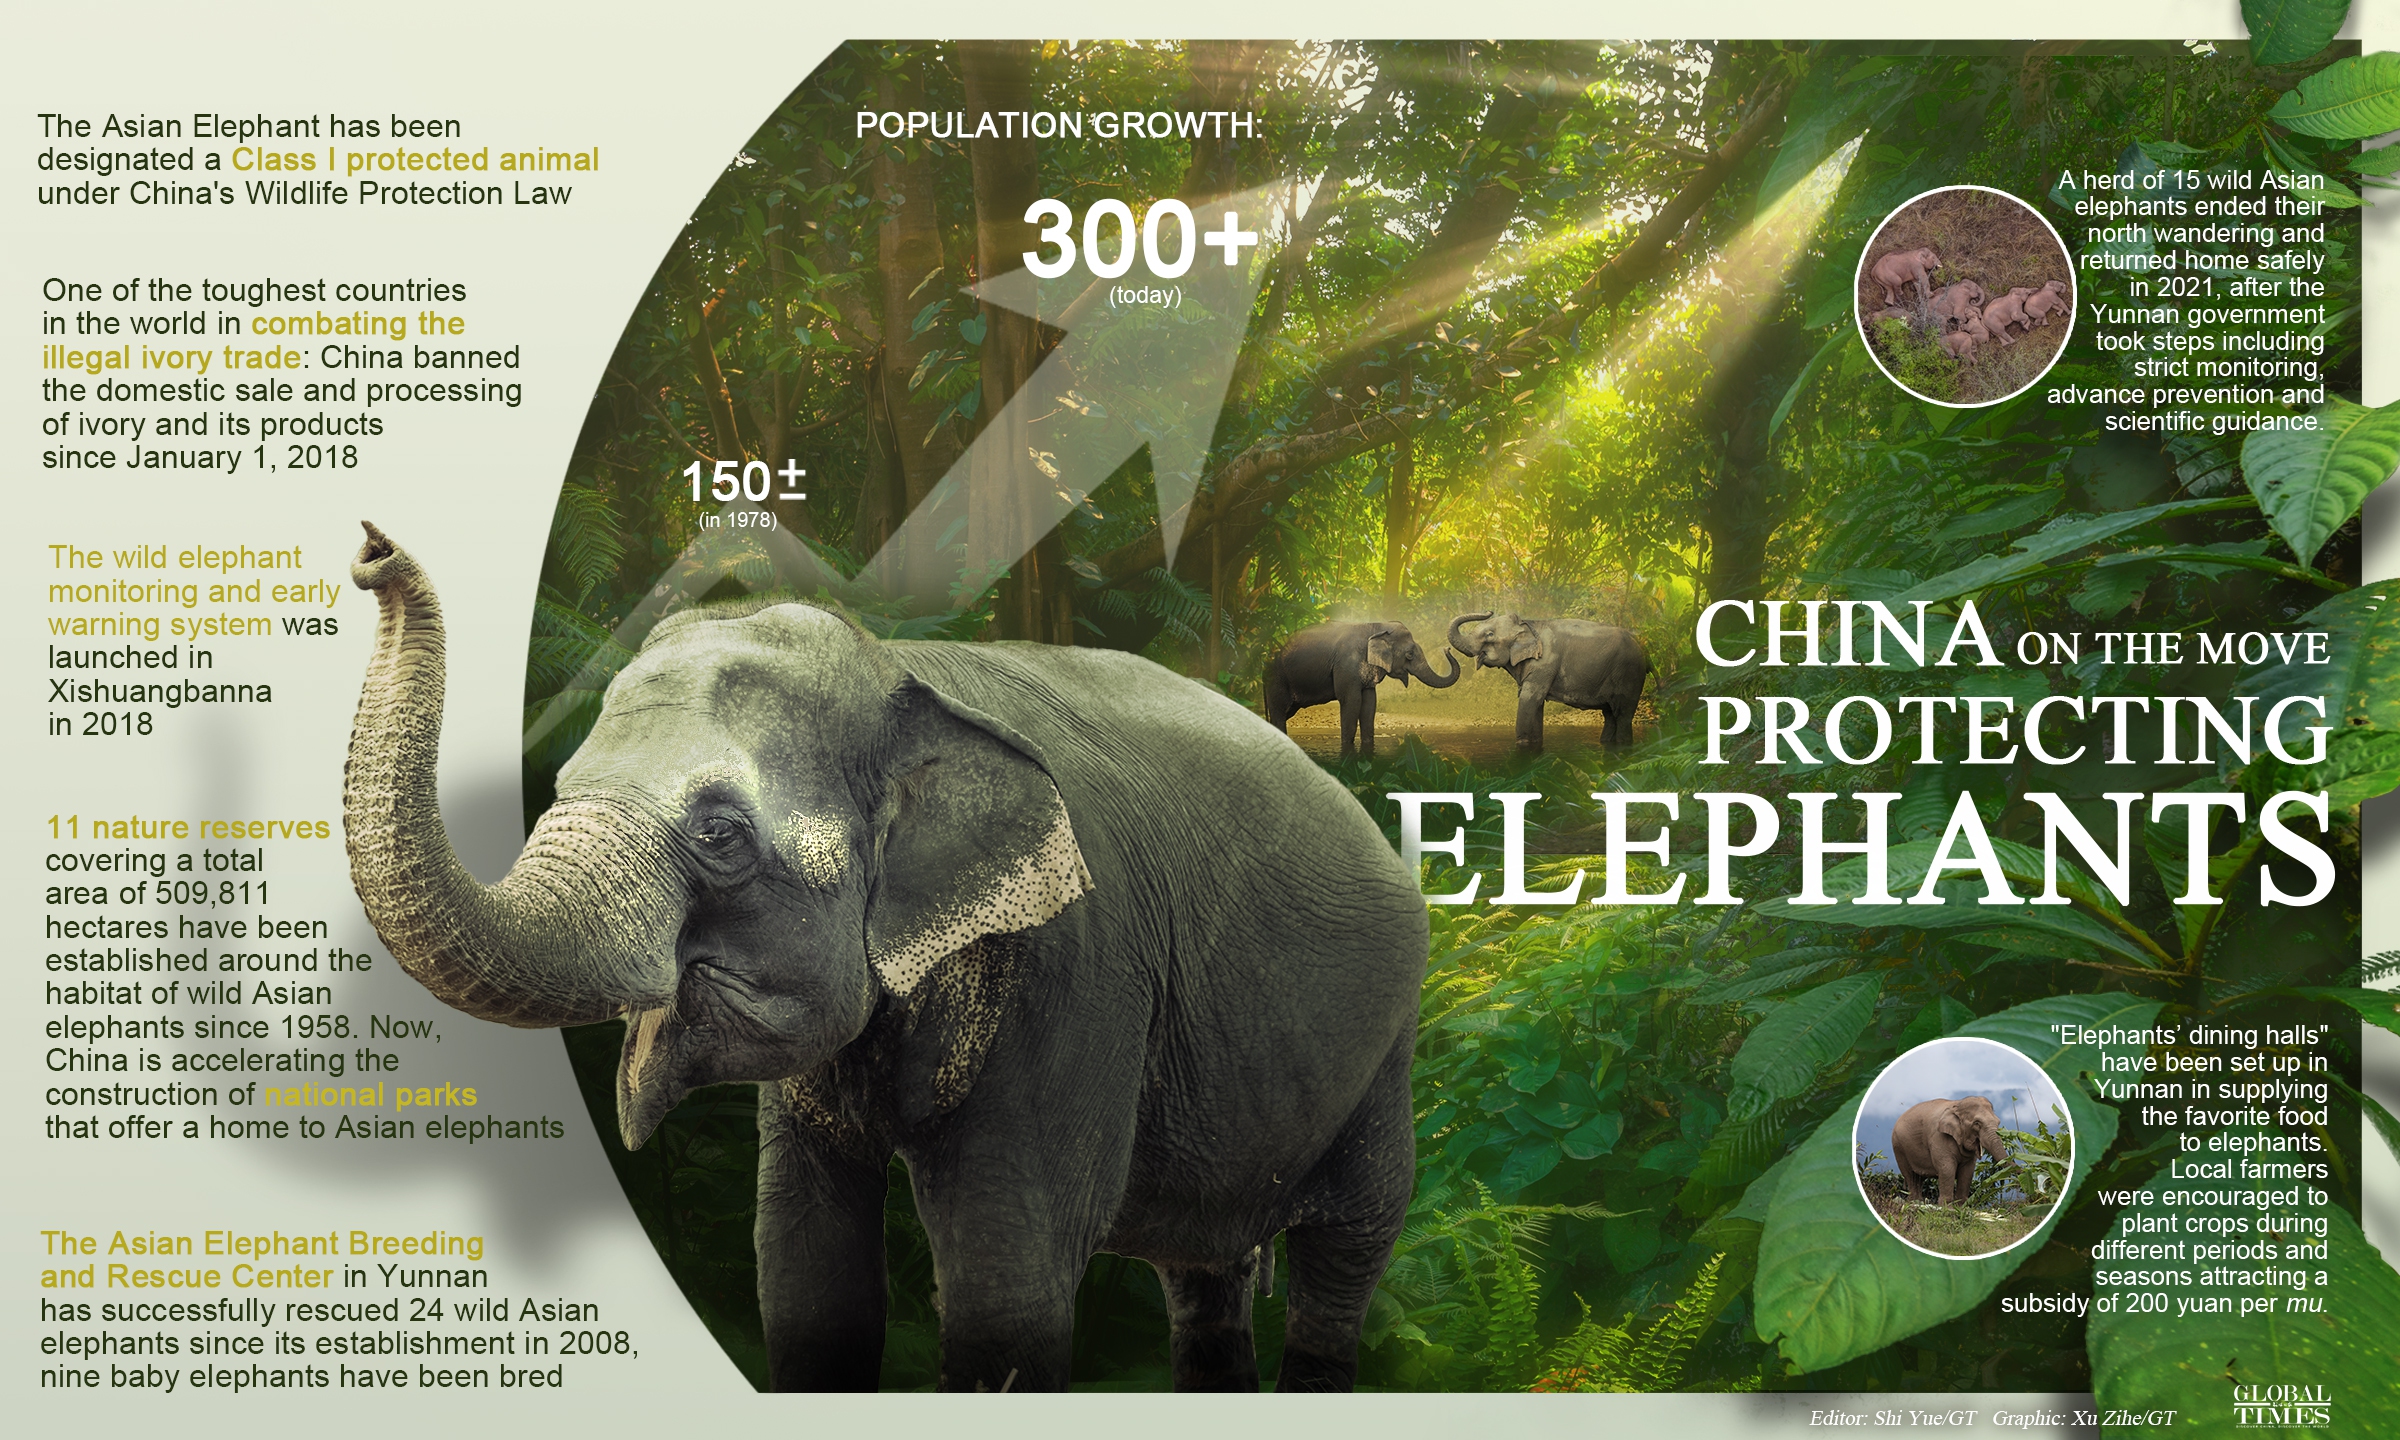 Protecting elephants, China on the move Graphic:Xu Zihe/GT